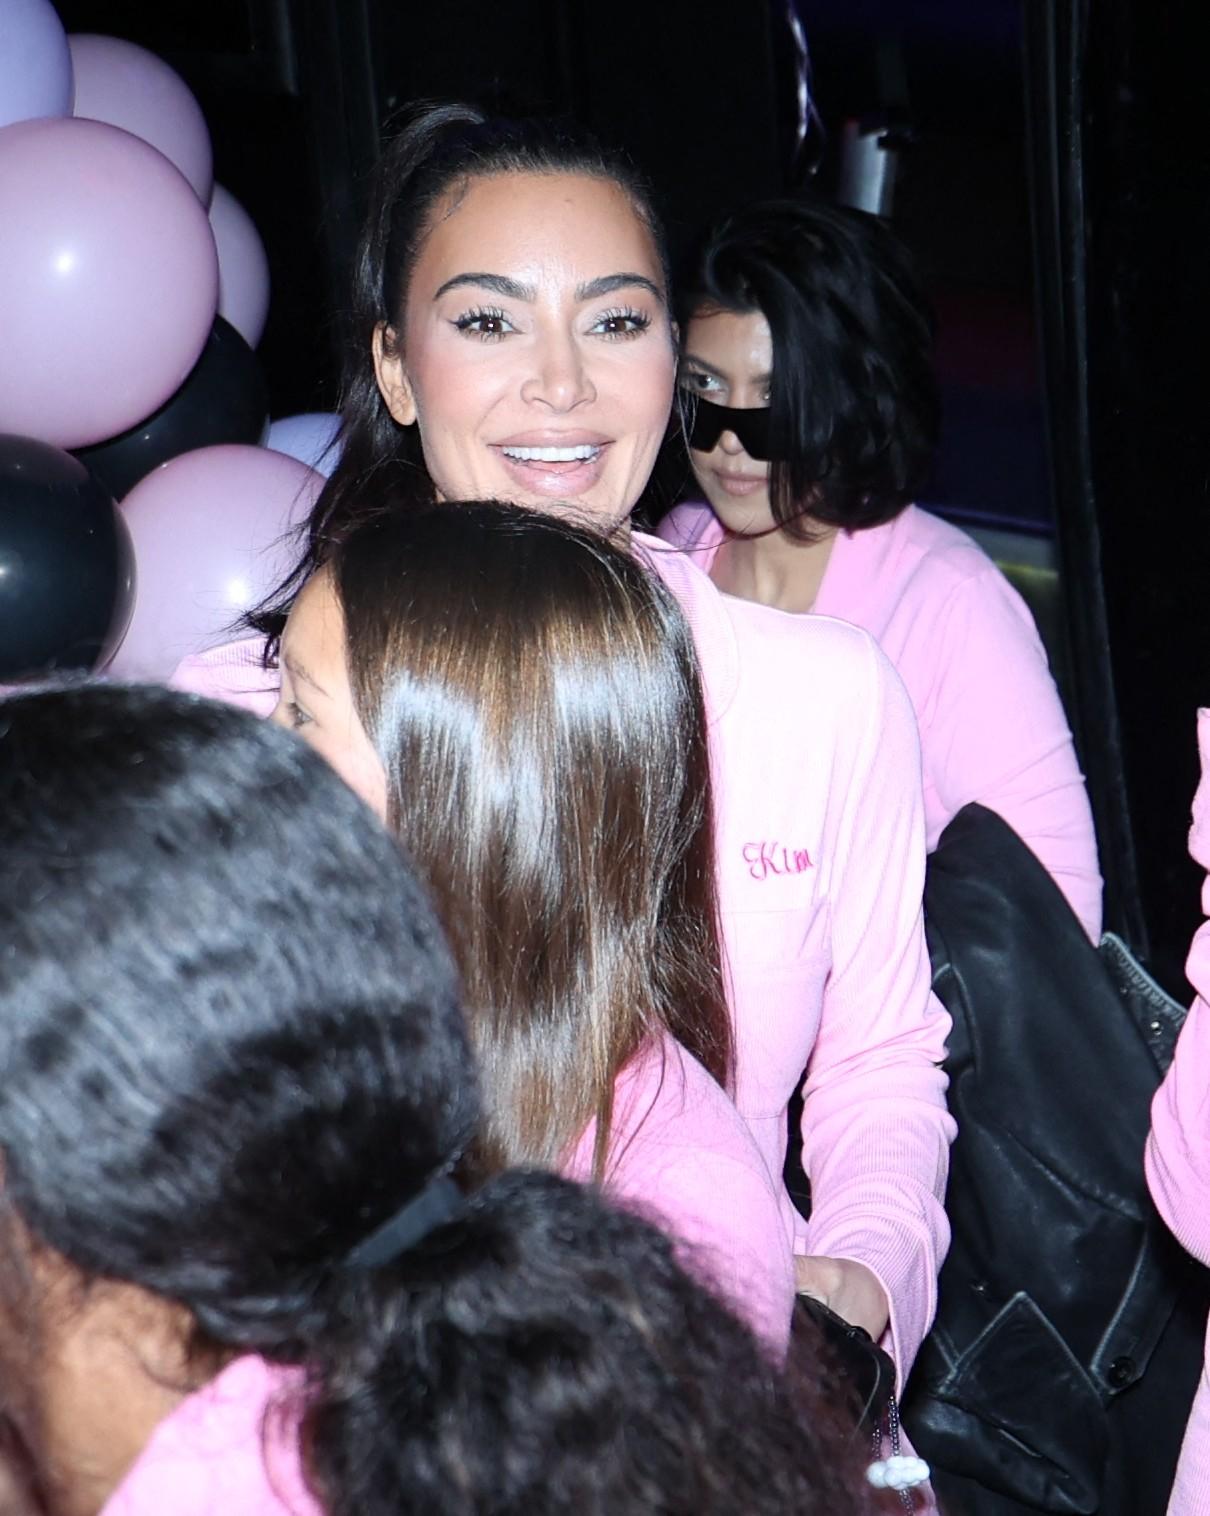 Kim Kardashian celebrates daughter North apos s 10th birthday in slippers and onsie apos s with Kourtney and others